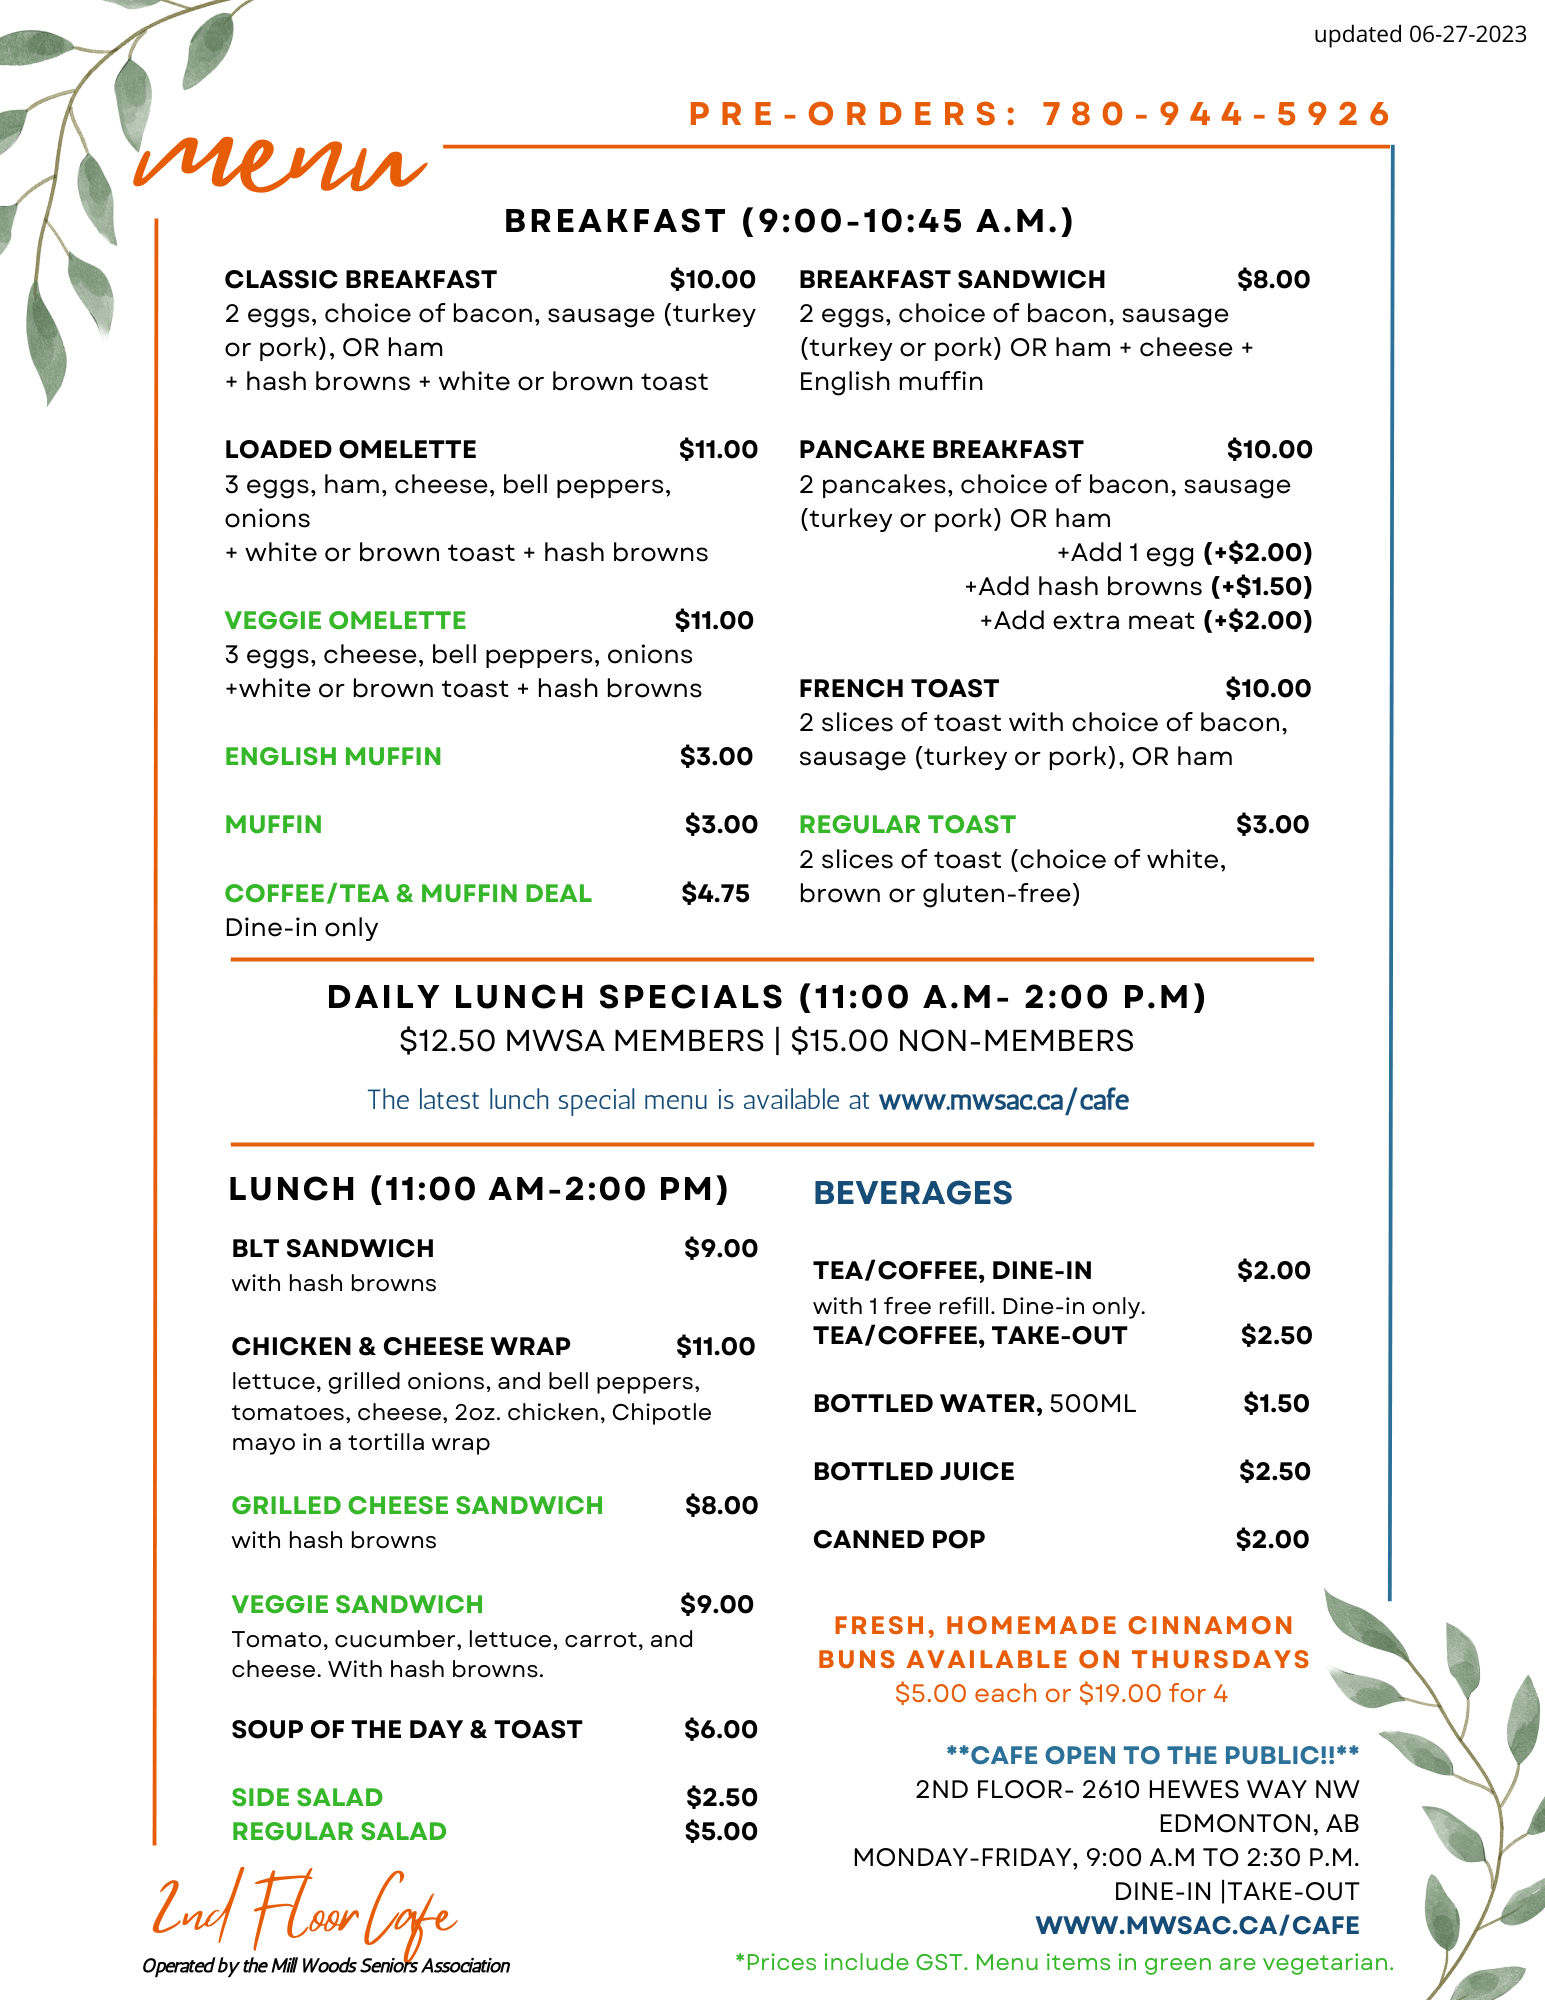 MWSA 2ND FLOOR CAFE BREAKFAST AND LUNCH MENU